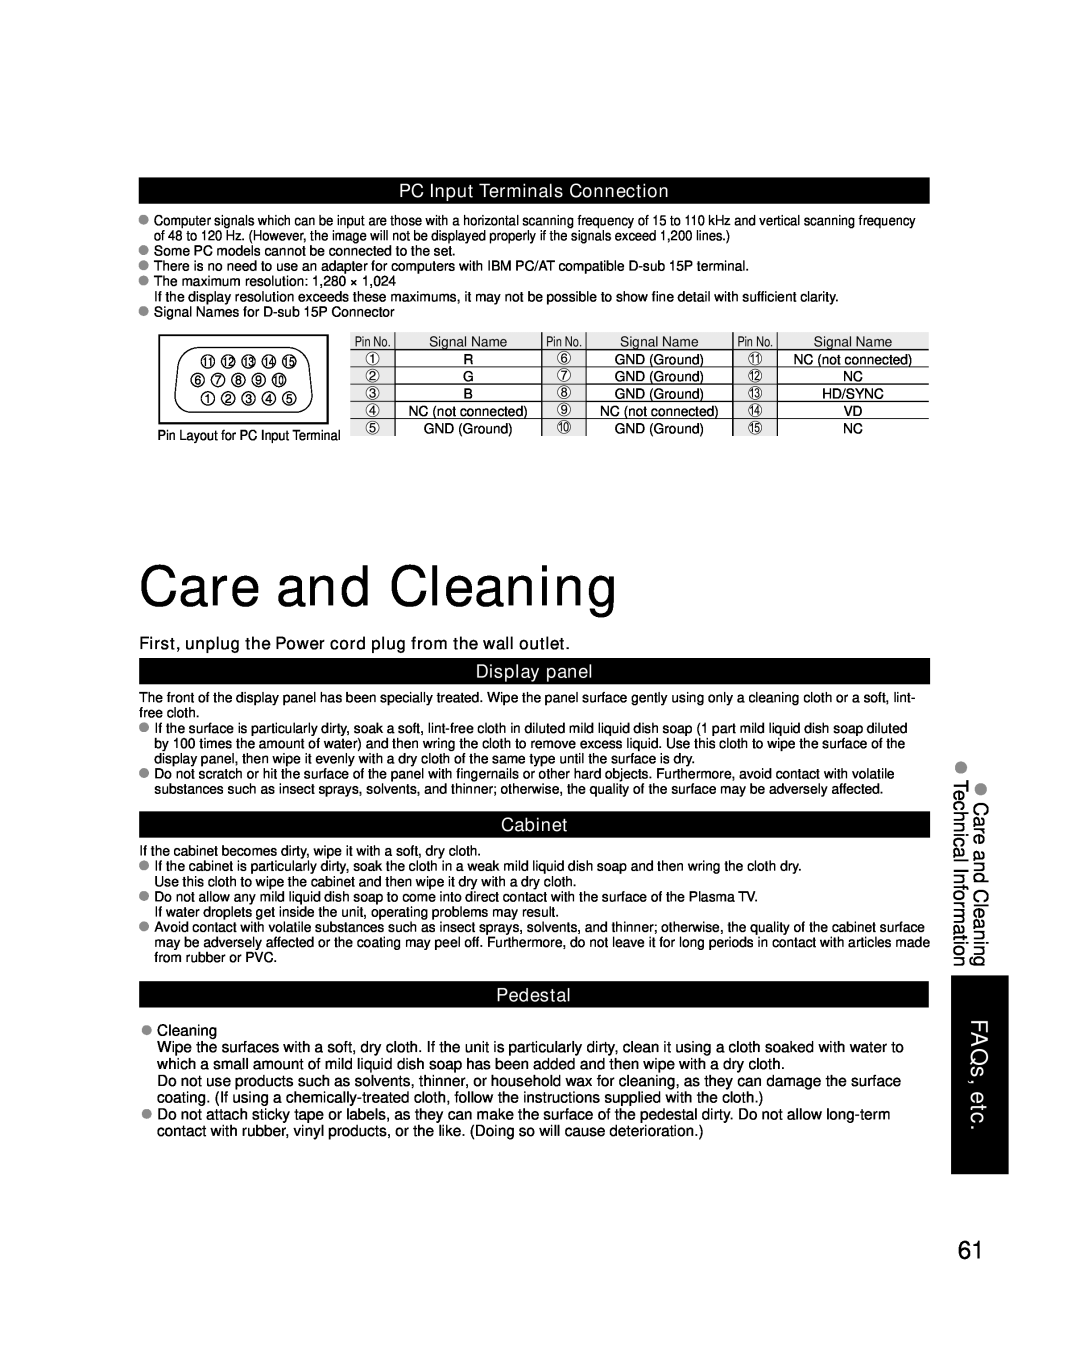 Panasonic TC-P46G10 Care and Cleaning FAQs, etc. Technical Information, PC Input Terminals Connection, Display panel 